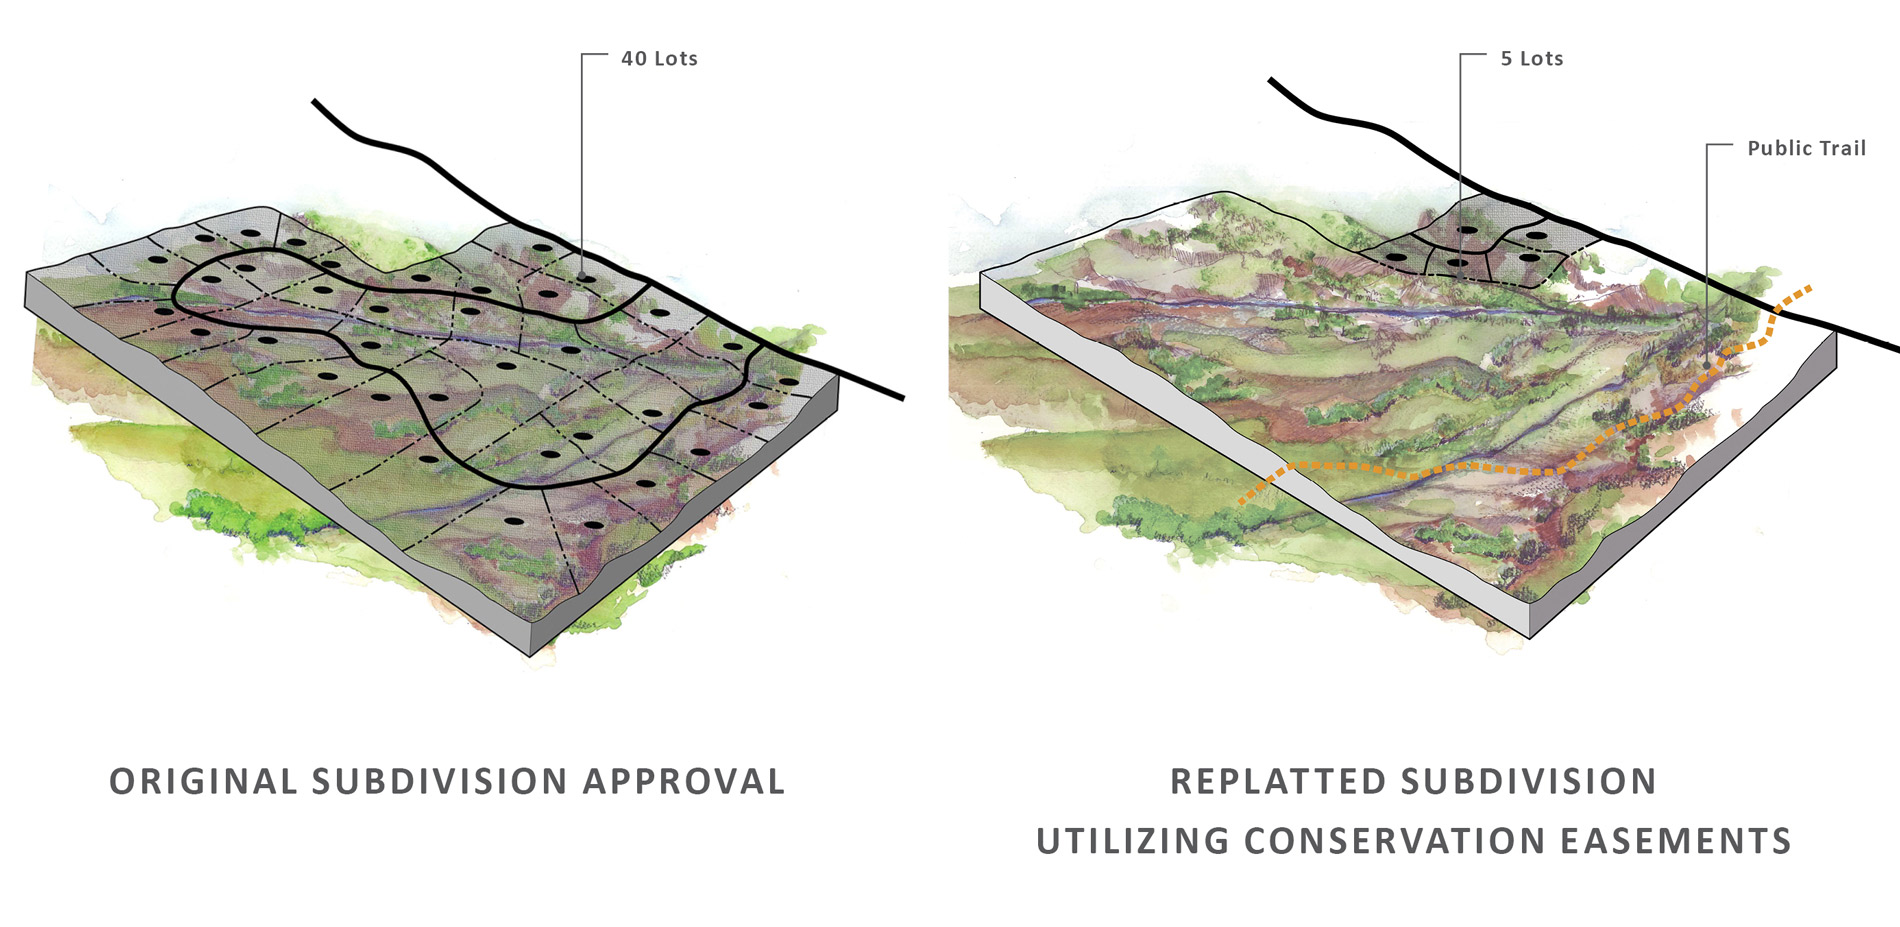 Approved, yet unbuilt subdivisions were “replatted” to preserve and enhance open space characteristics. Detailed analysis of site features determined …